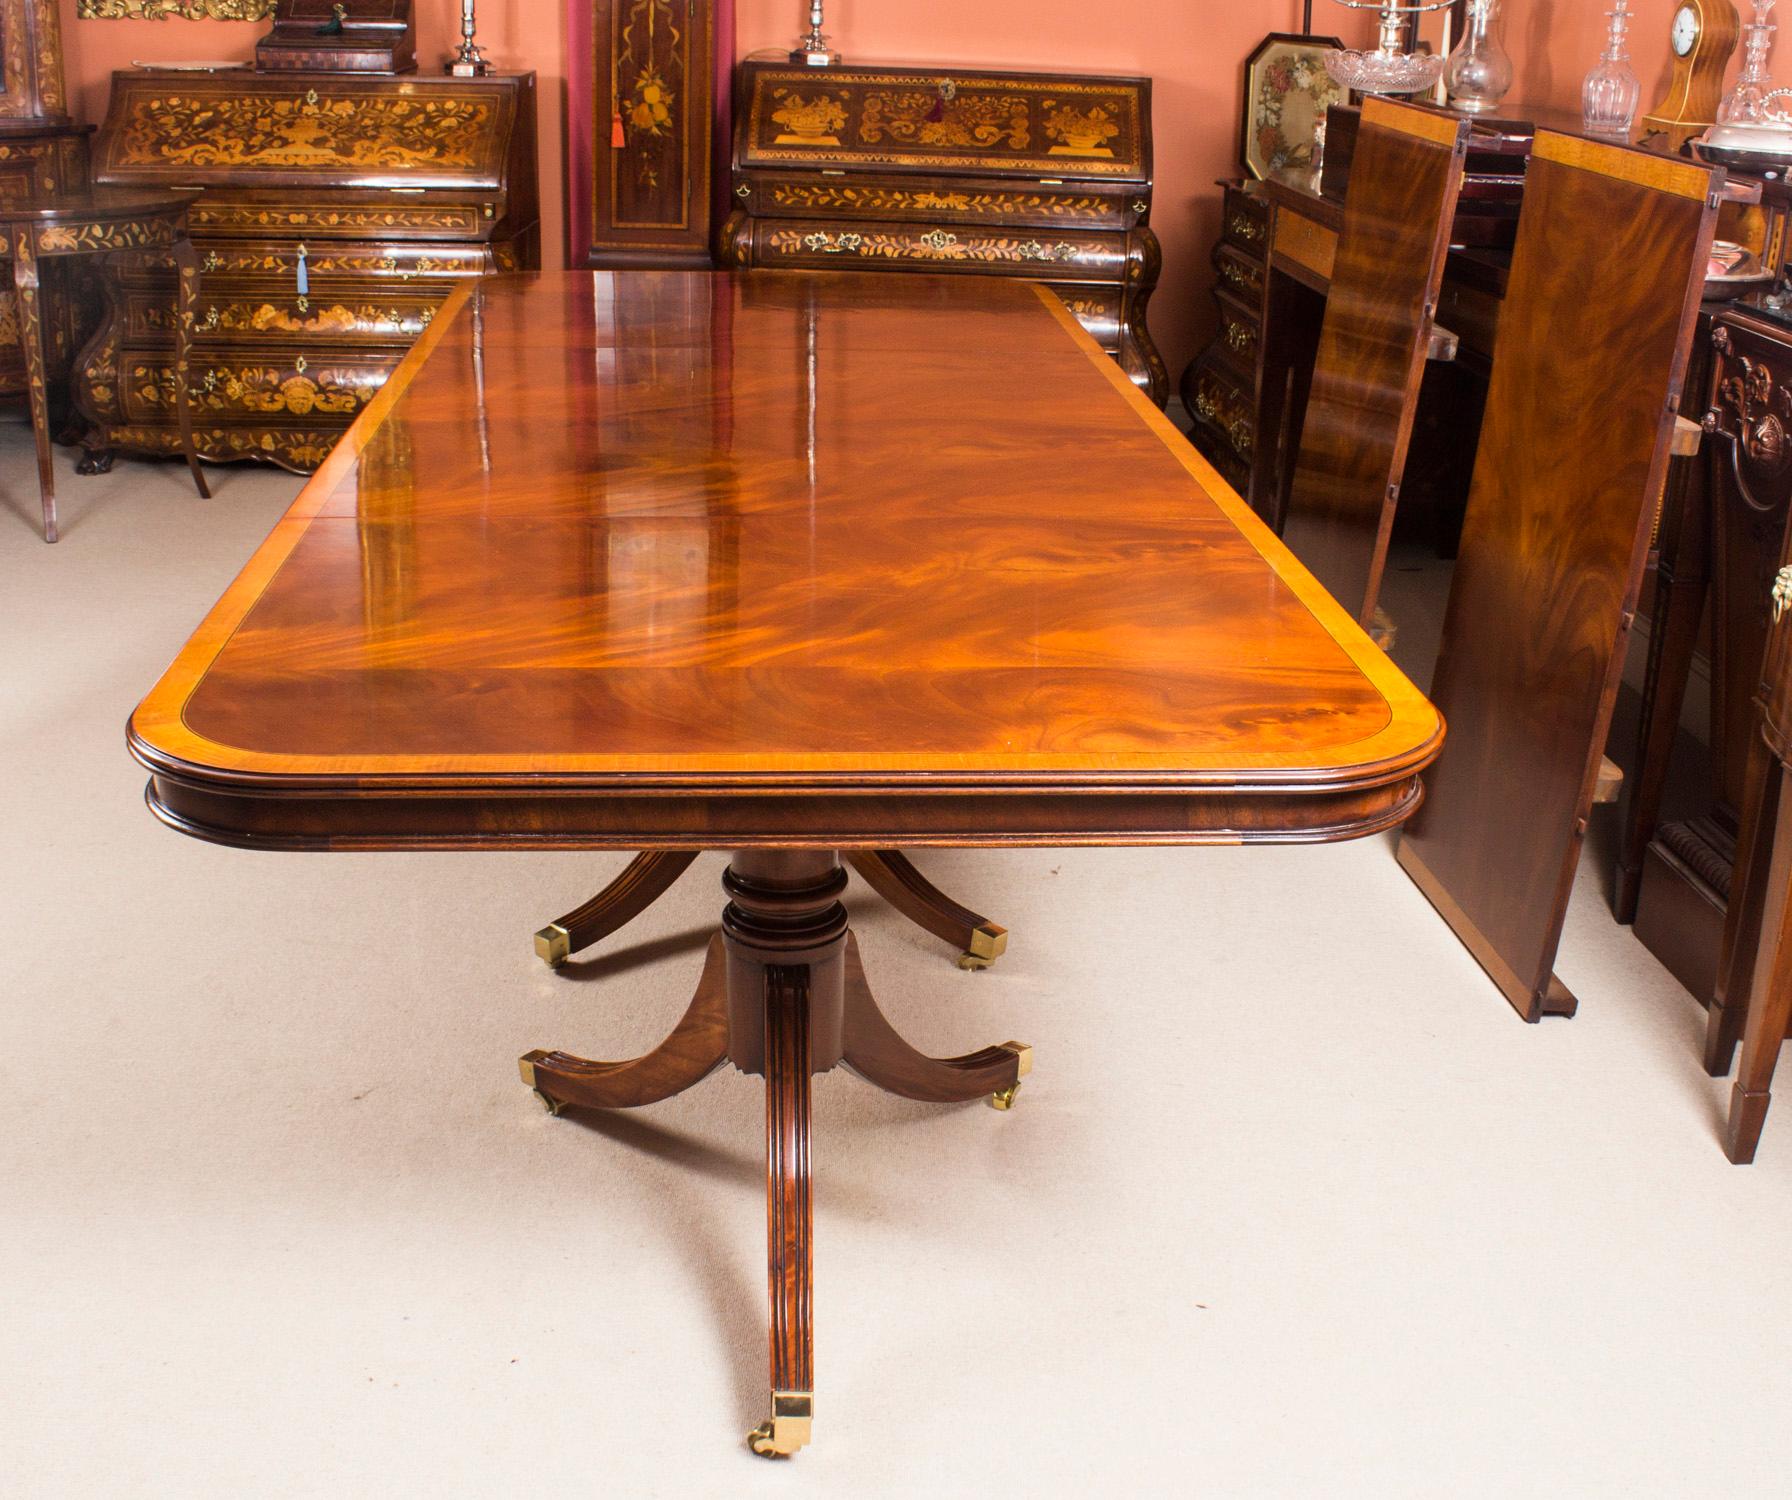 Vintage 14 ft Three Pillar Mahogany Dining Table and 16 Chairs 20th Century For Sale 6